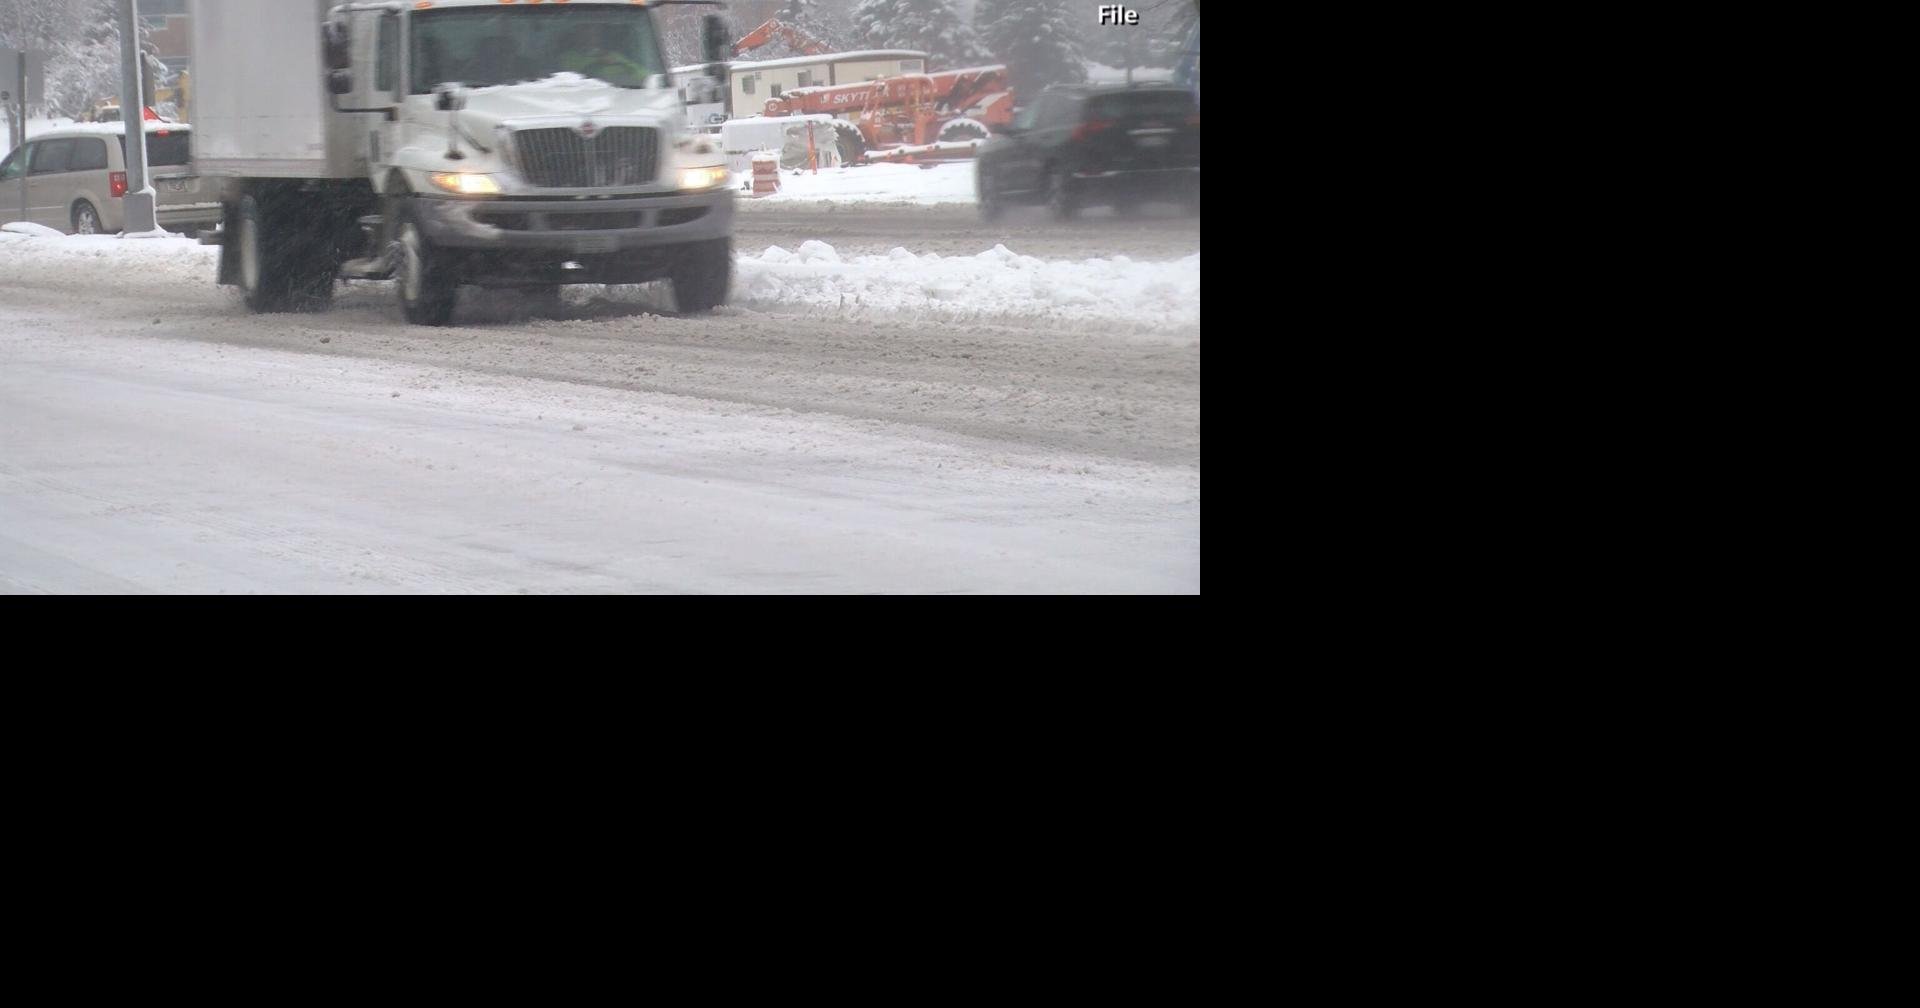 Wisconsin State Patrol prepares drivers for winter weather